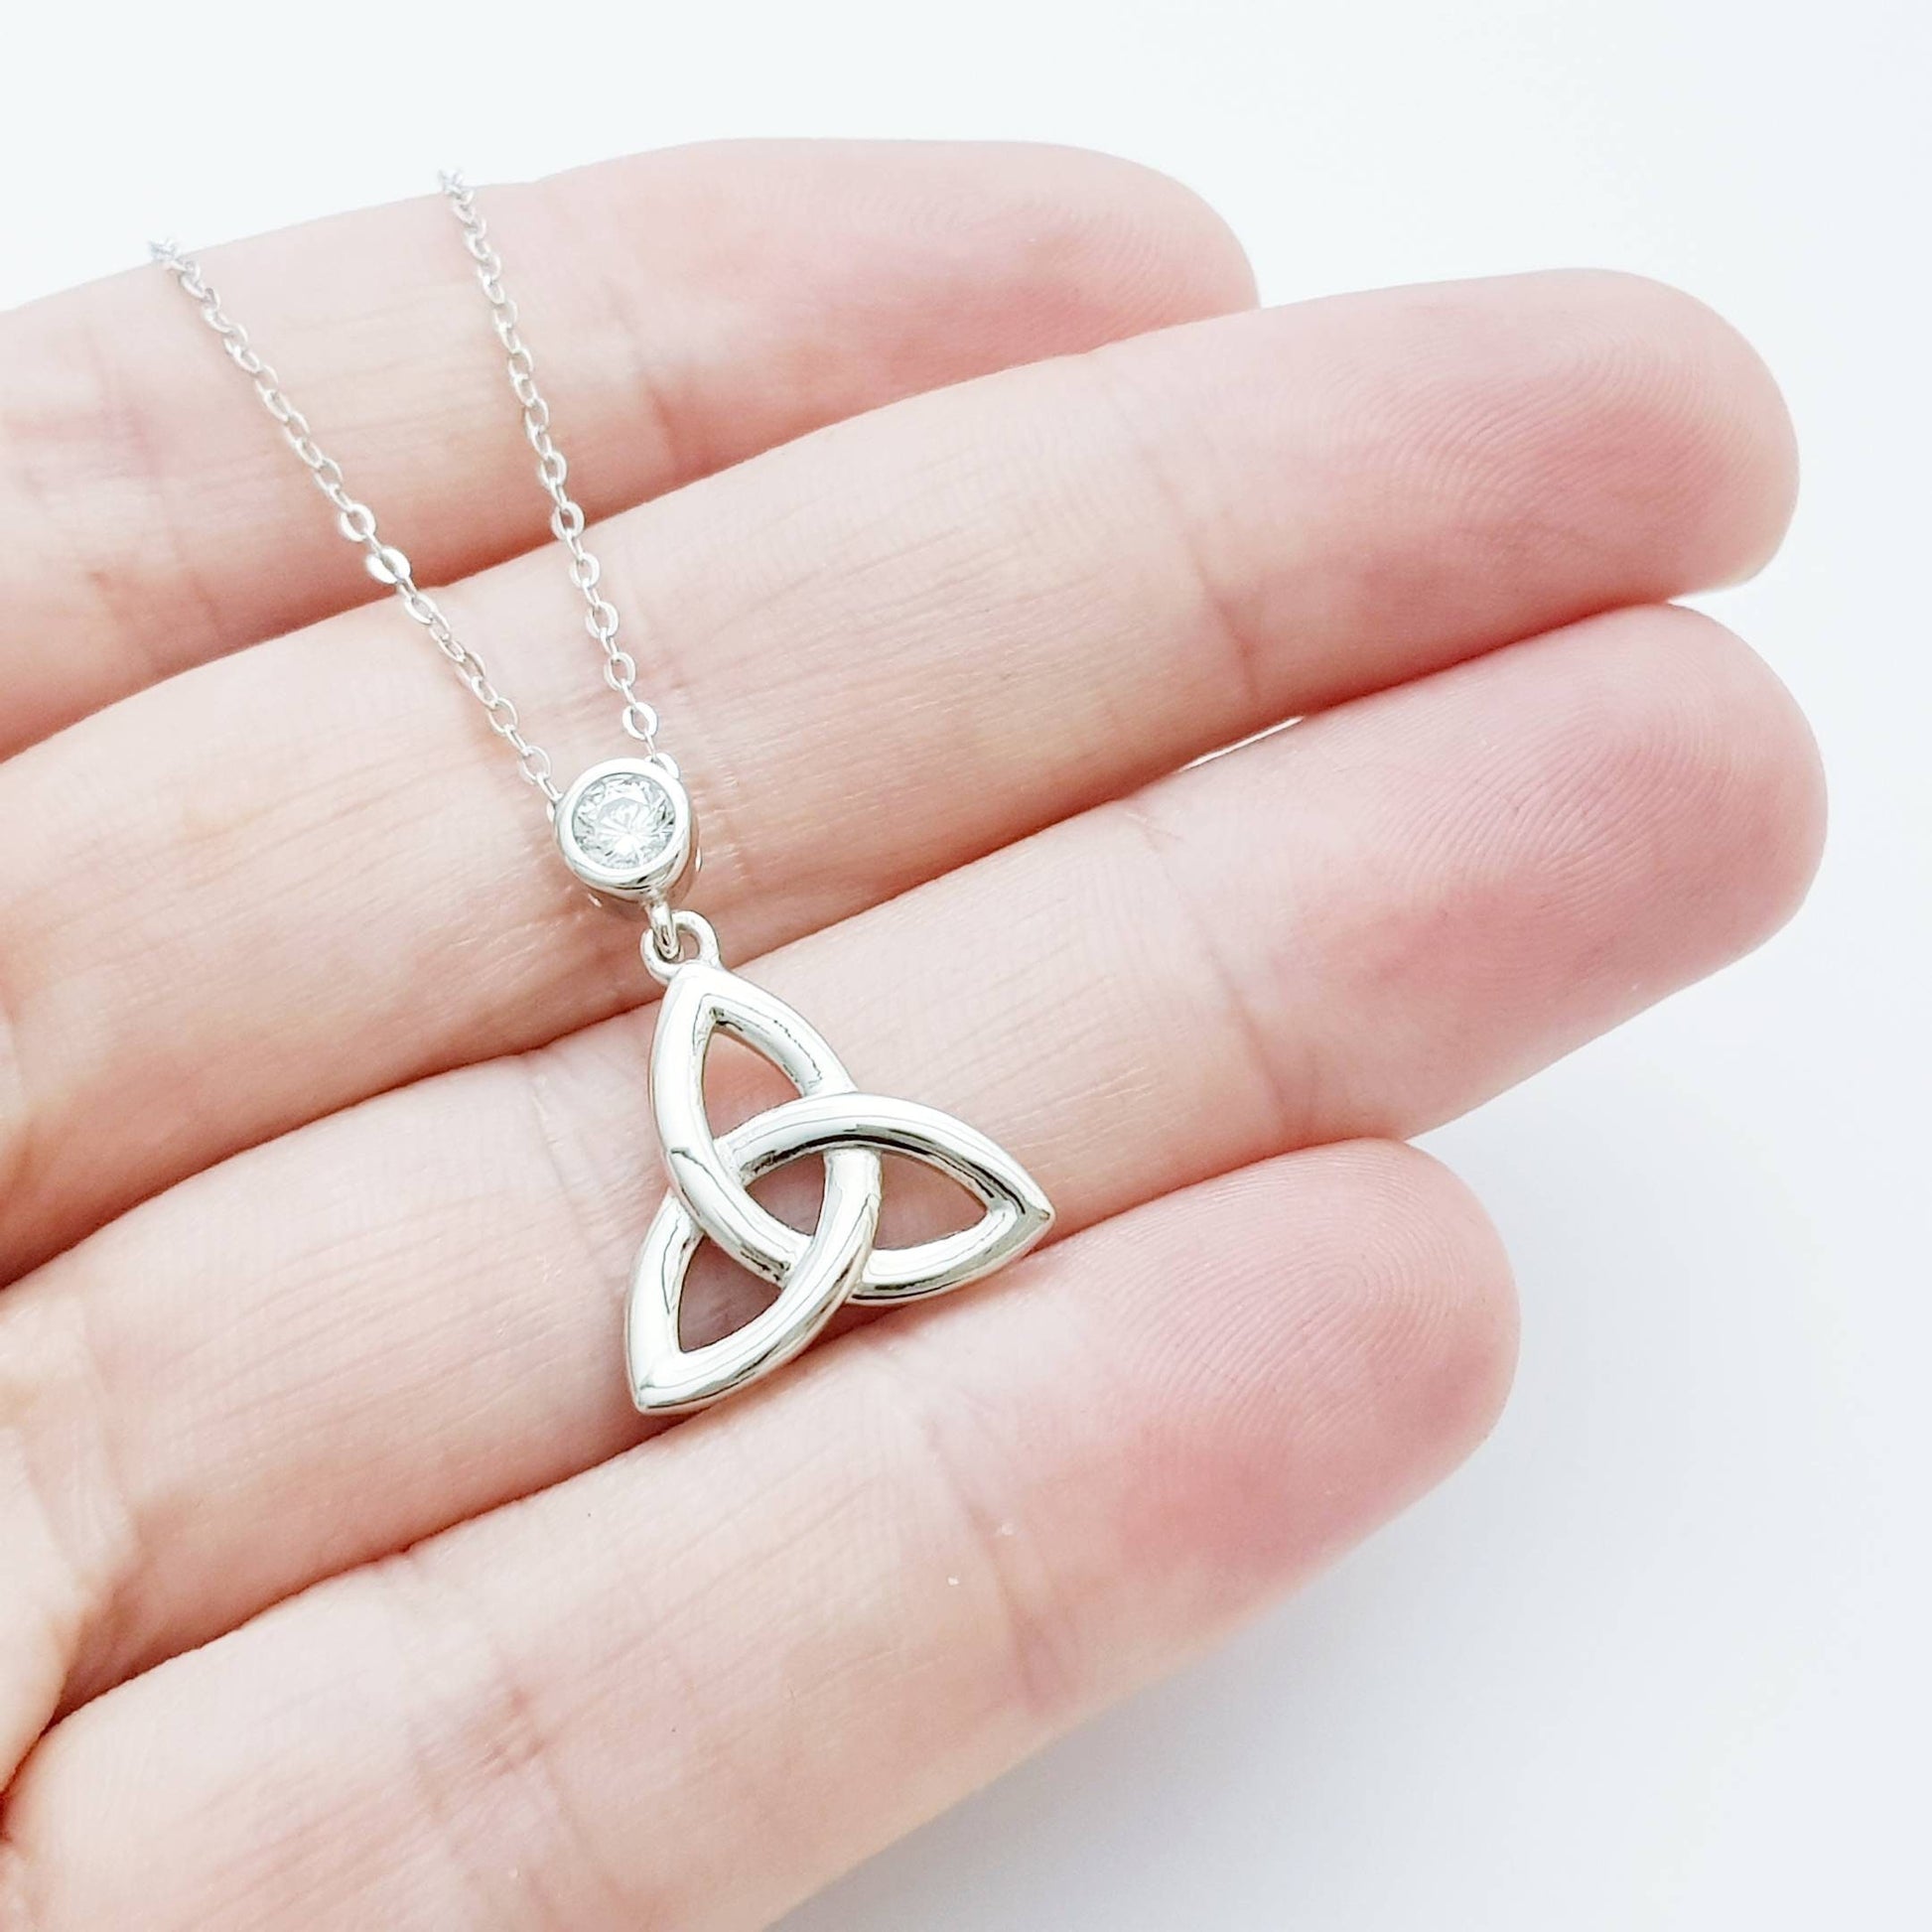 Trinity knot pendant, celtic necklace made in Ireland, celtic angel wing chain